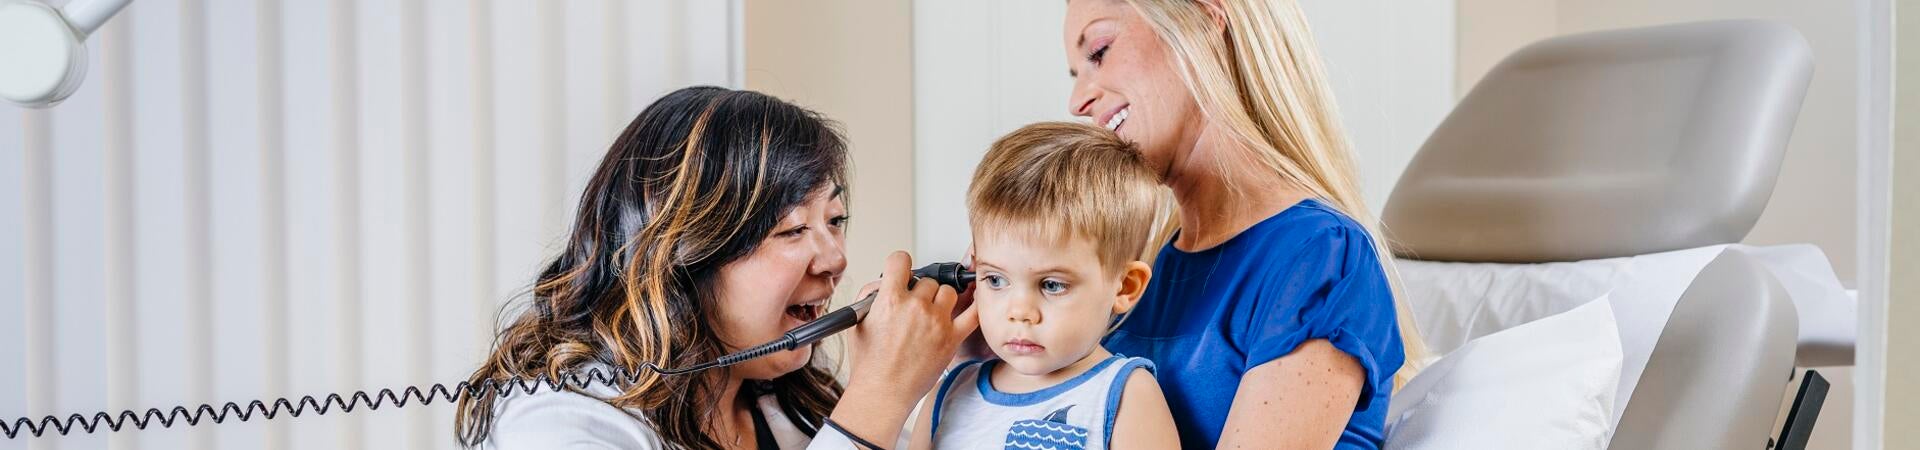 Doctor working with child as mother looks on